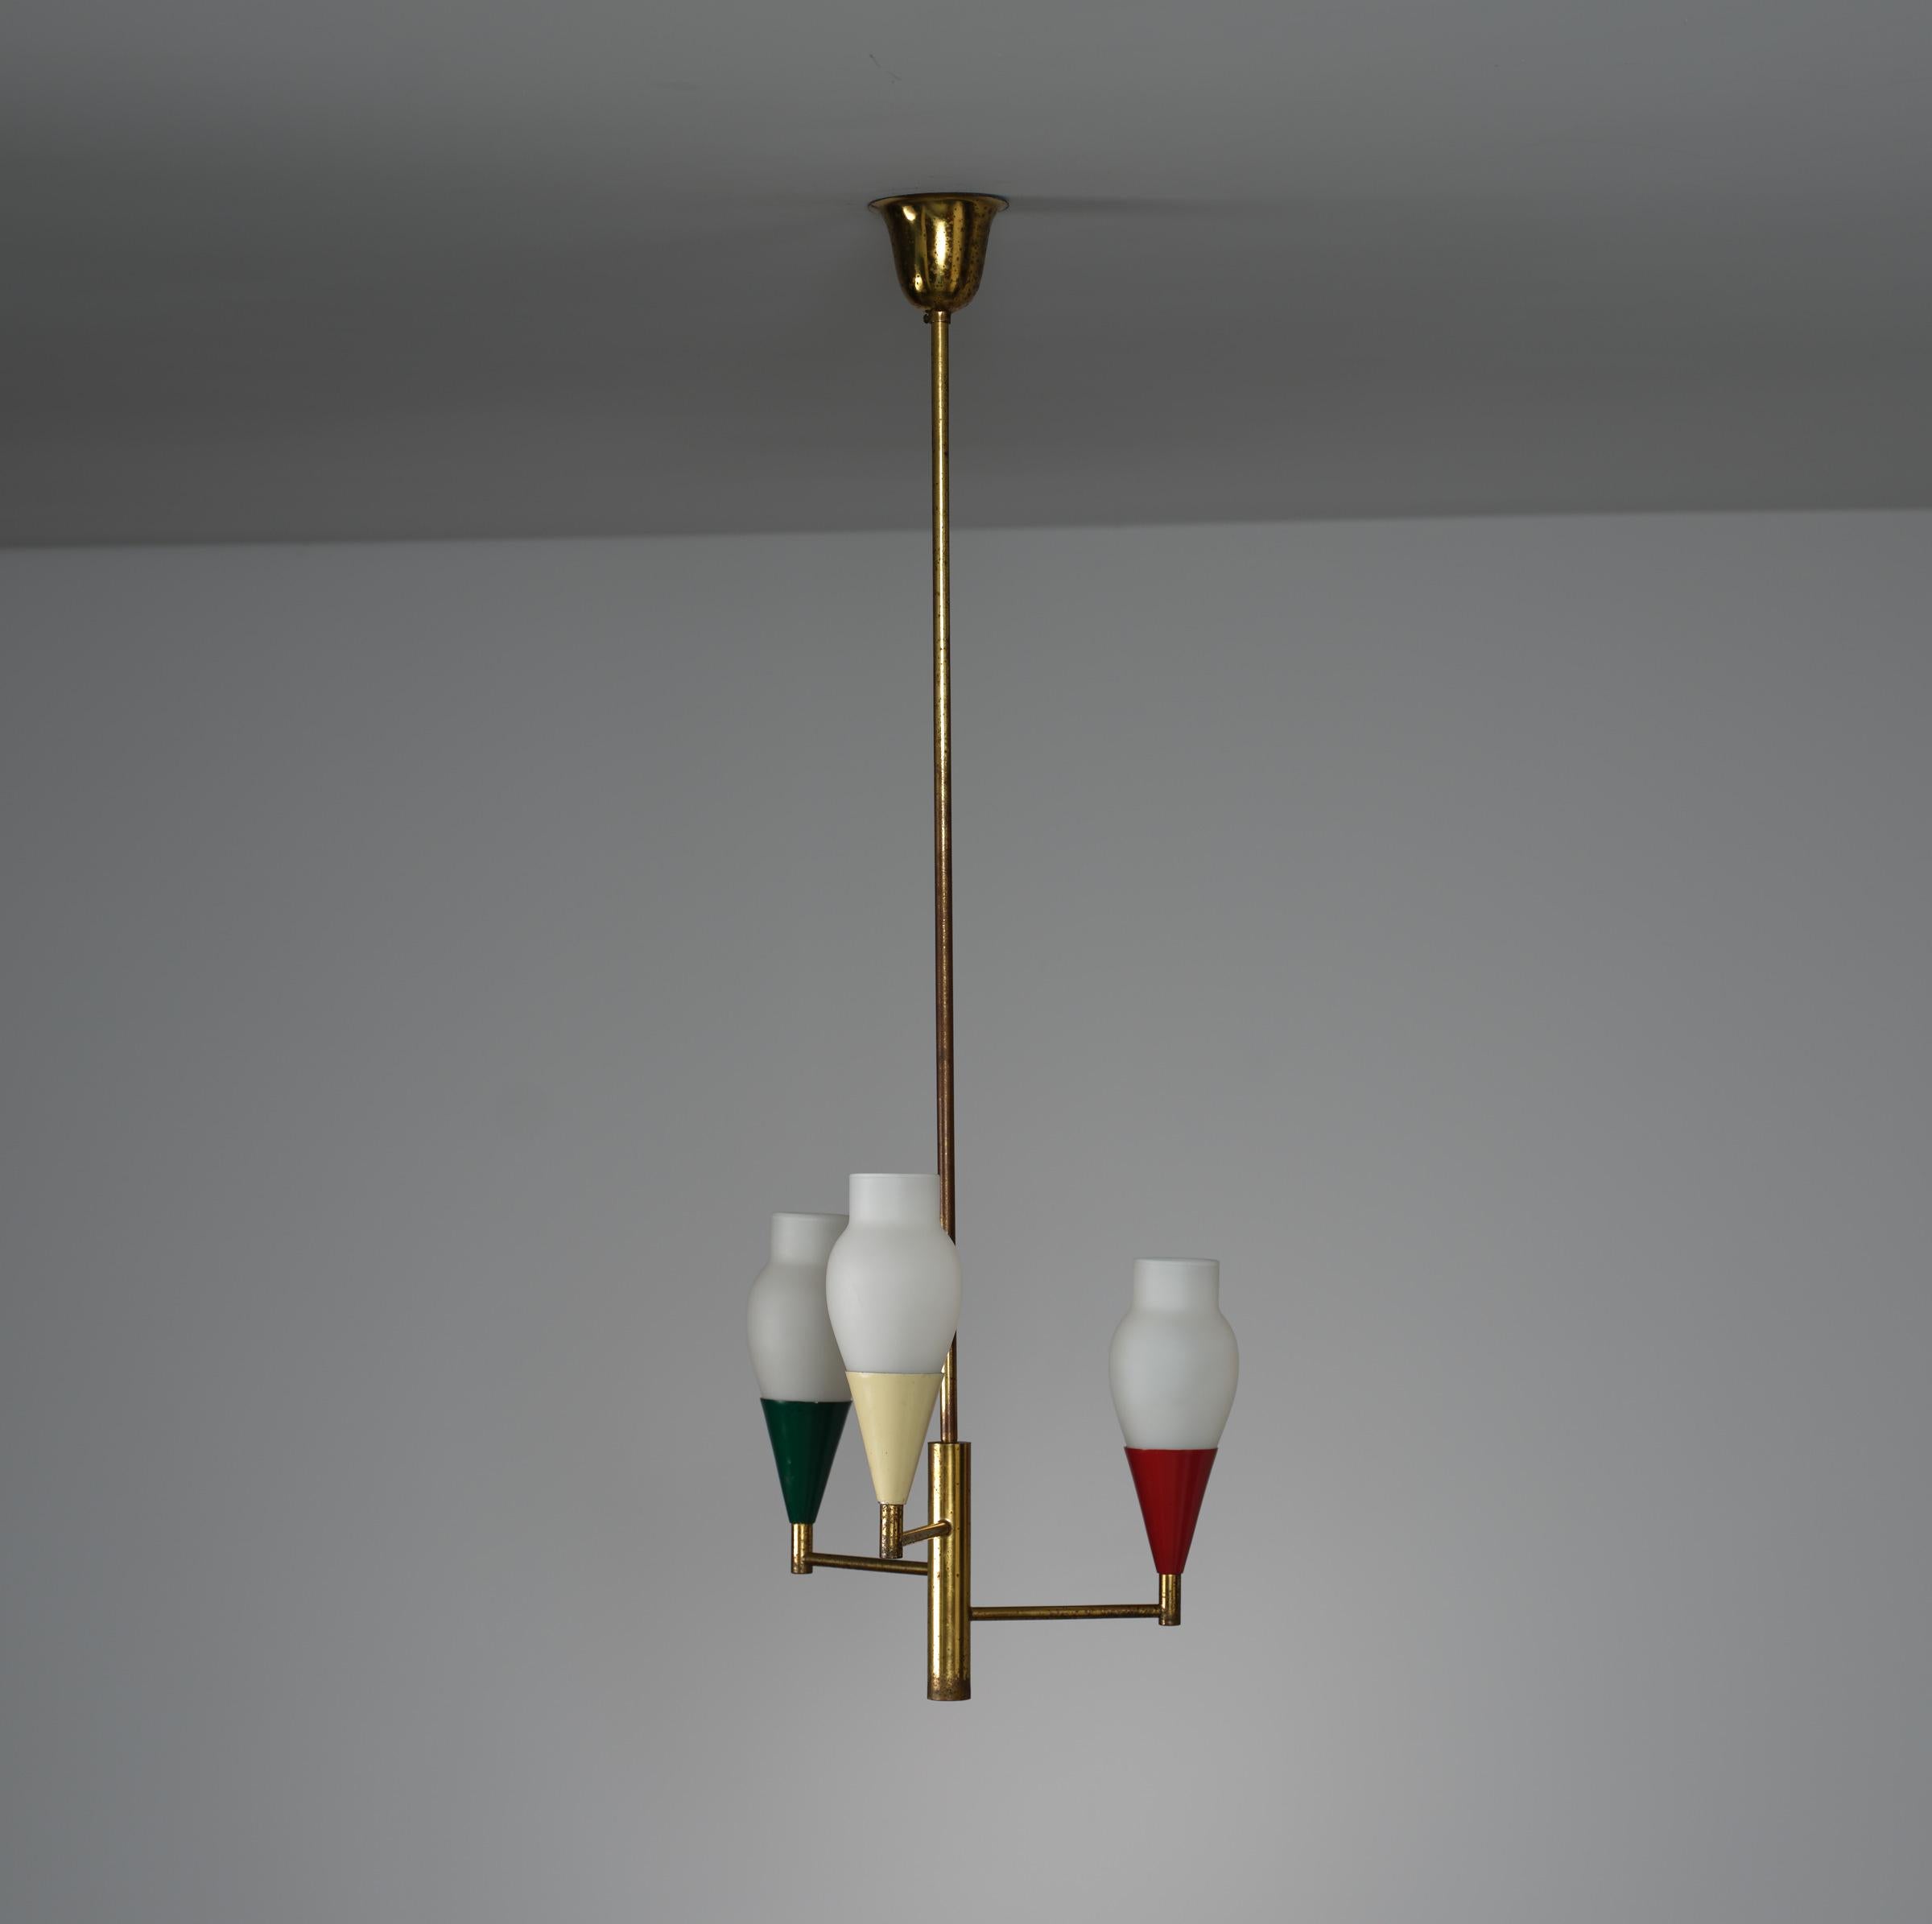 1950s Italian Brass Chandelier with Modern Design and Colorful Metal Accents For Sale 1